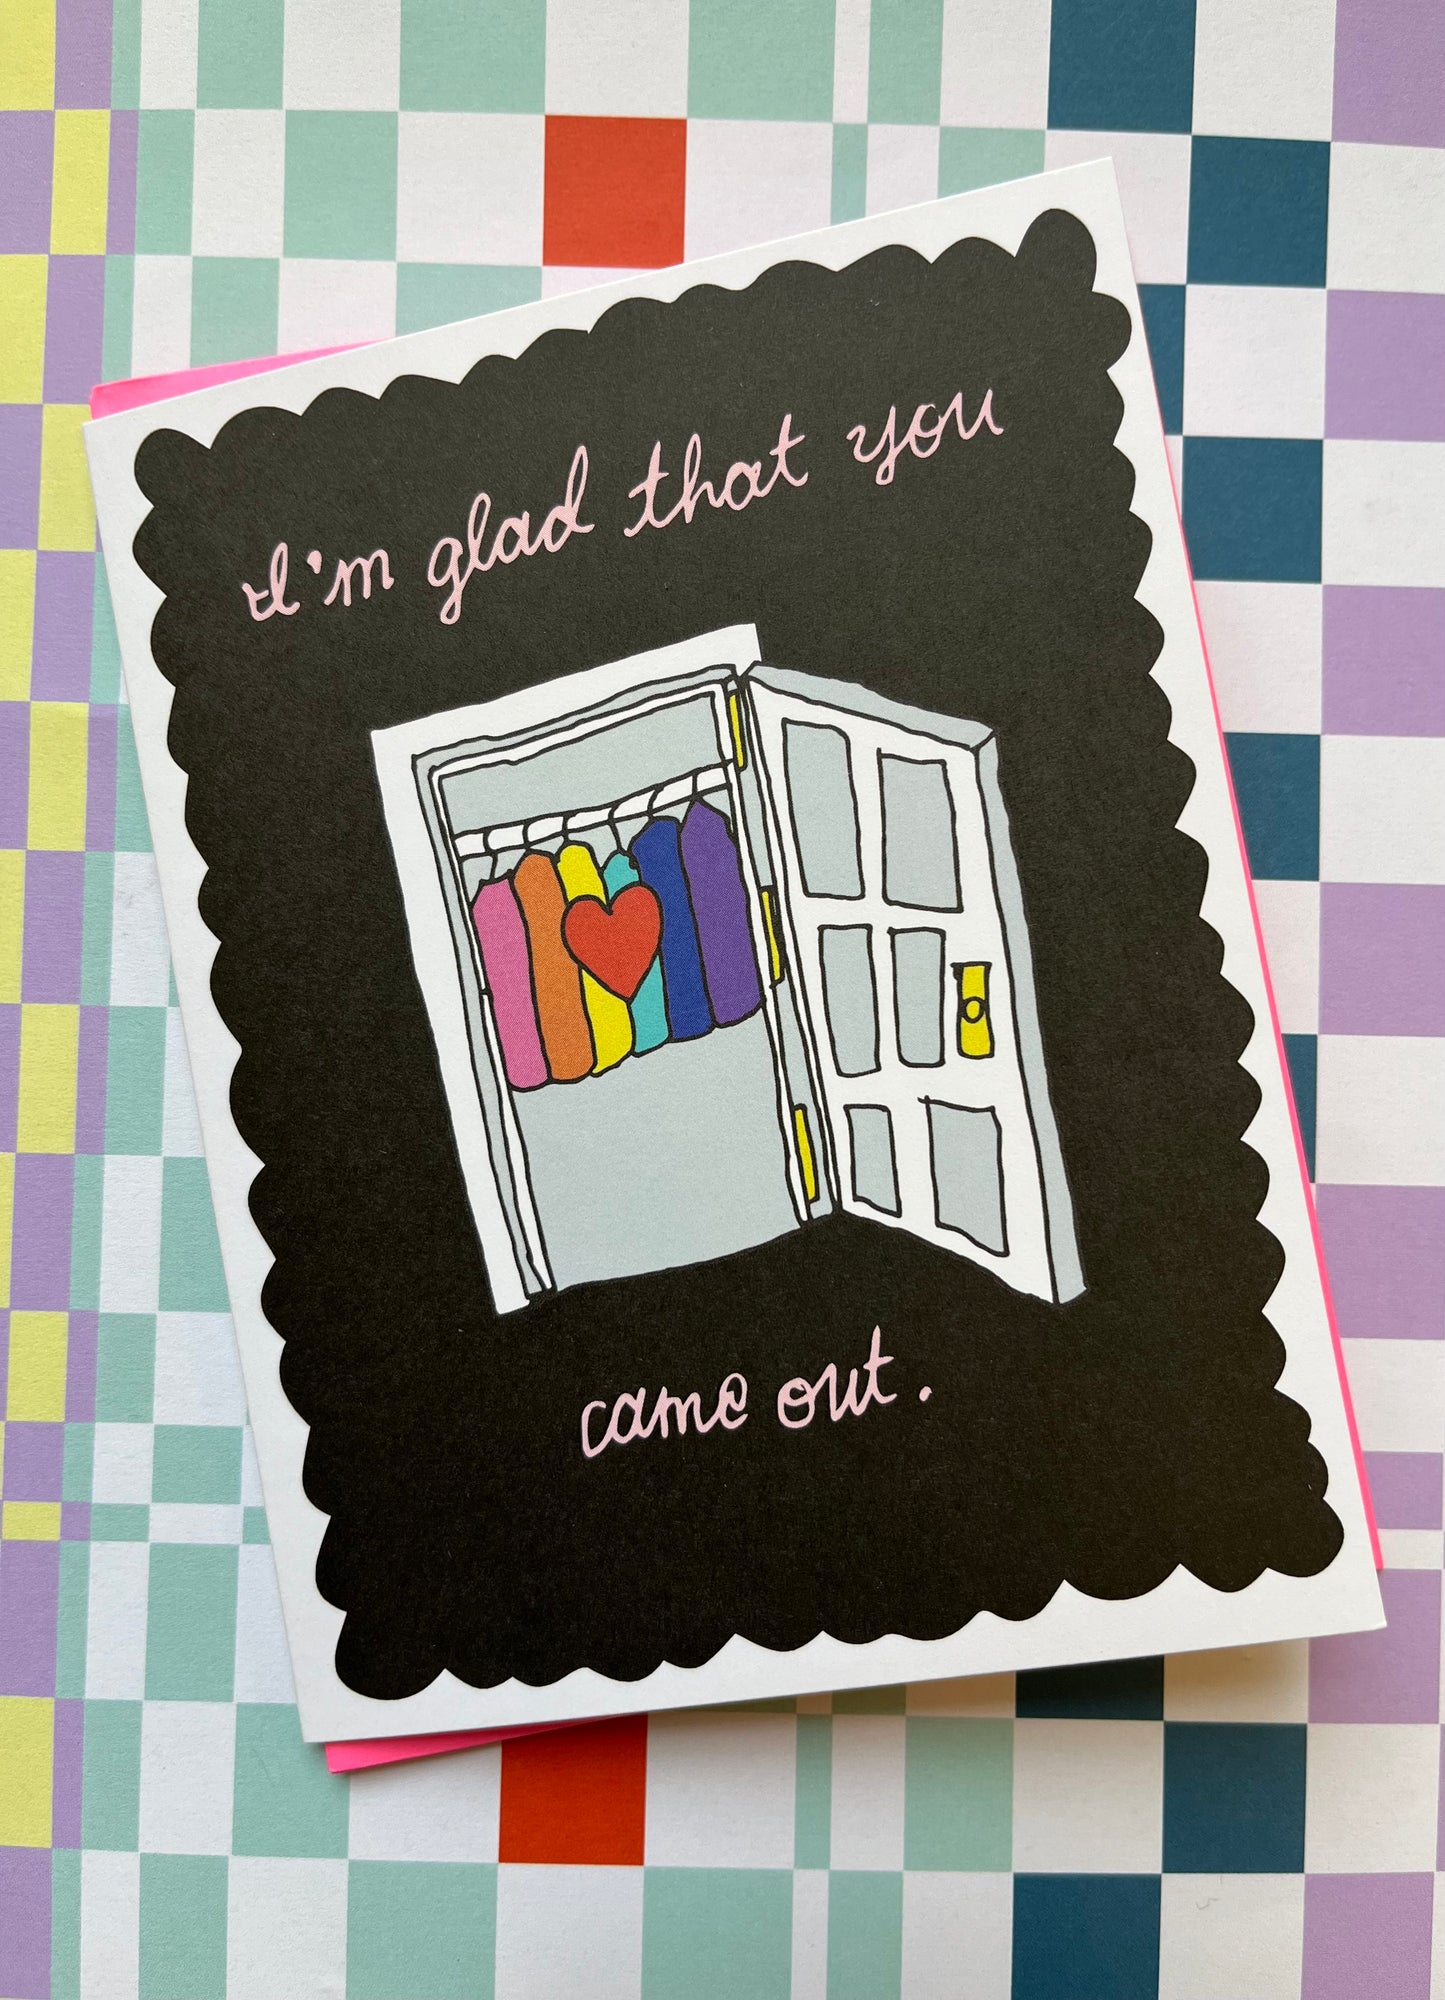 I'm Glad You Came Out card